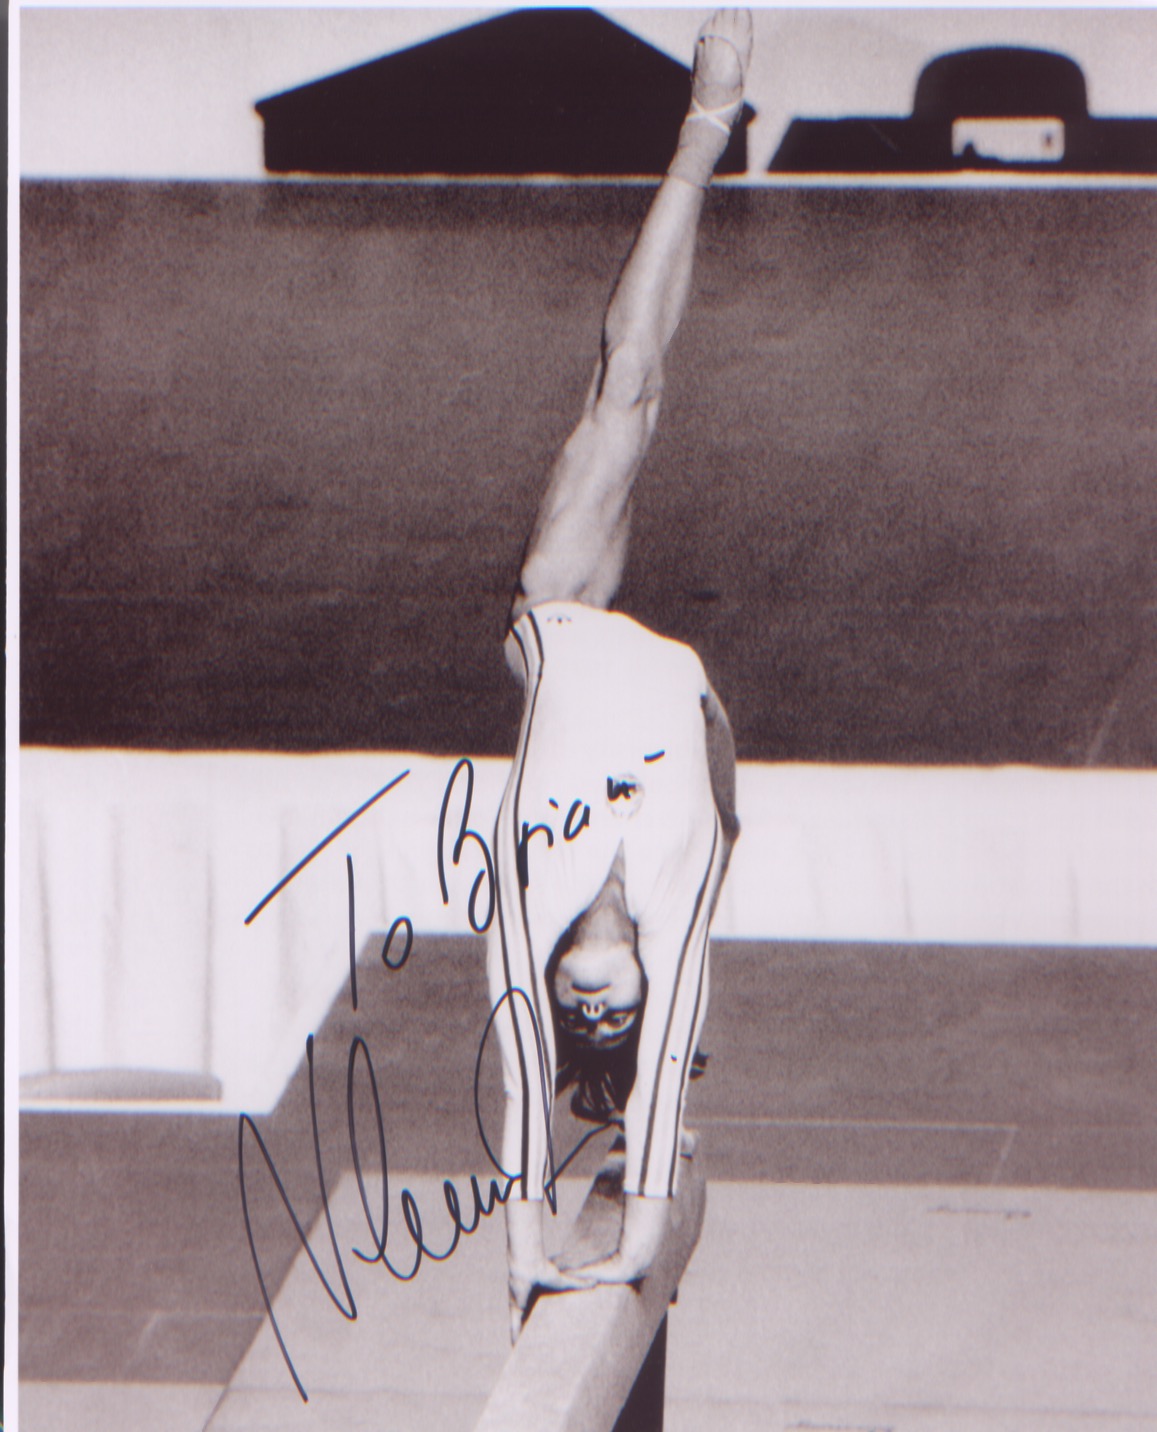 Nadia Commaneci signed 10 x 8 inch photo in action at the Olympic Games.Good condition. All